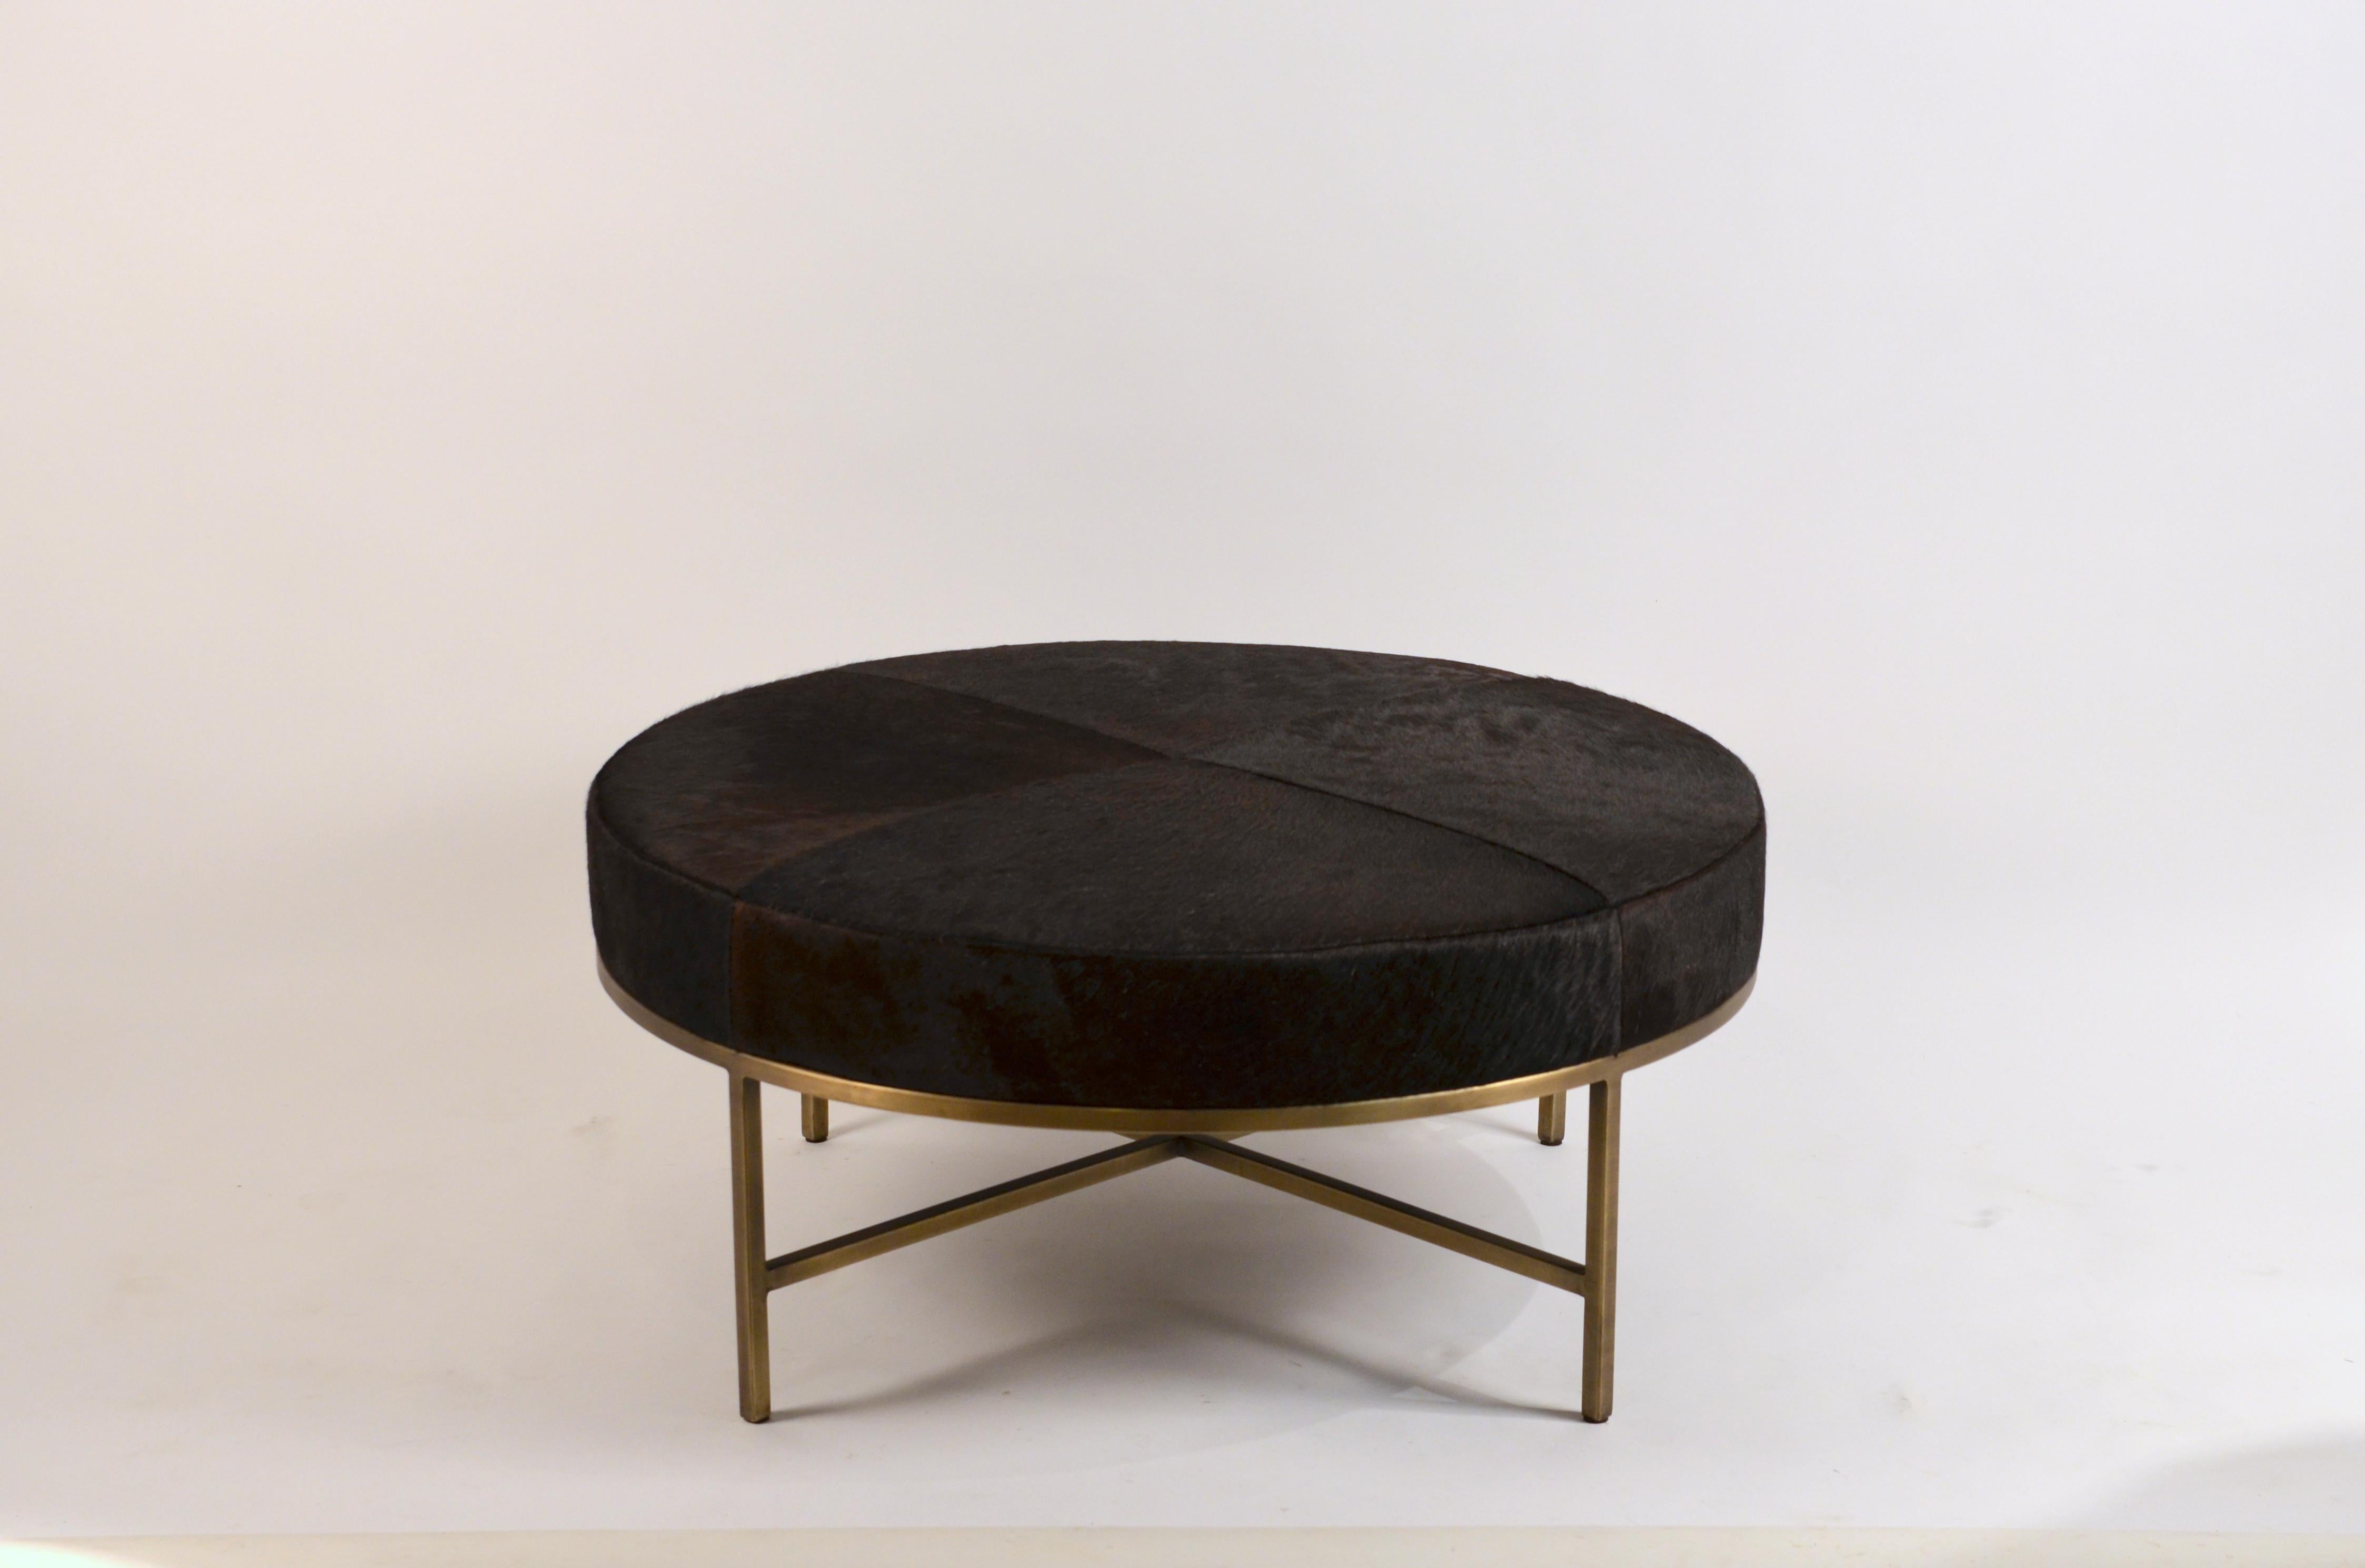 Chic 'Tambour' antiqued brass and dark brown hide ottoman by Design Frères.

Measures: 38 in. diameter x 16.5 in. tall (other sizes available).

Upholstered on the firmer side, so it can also be used as a coffee table, with a tray, to place